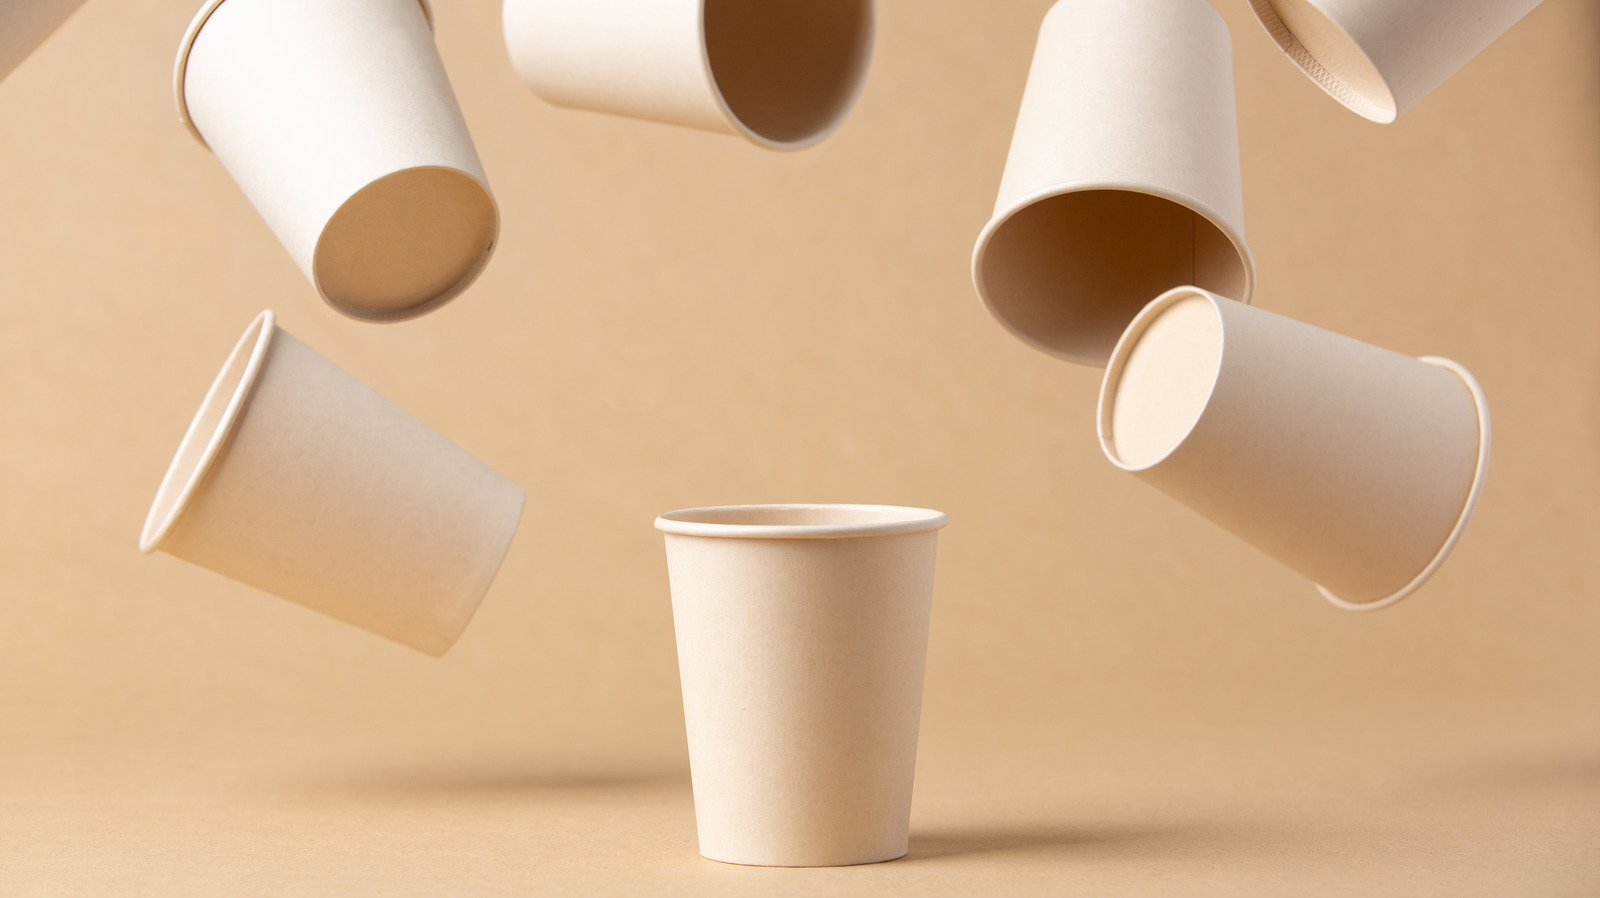 https://www.mashed.com/img/gallery/this-is-what-disposable-coffee-cups-are-really-made-from/l-intro-1666138969.jpg